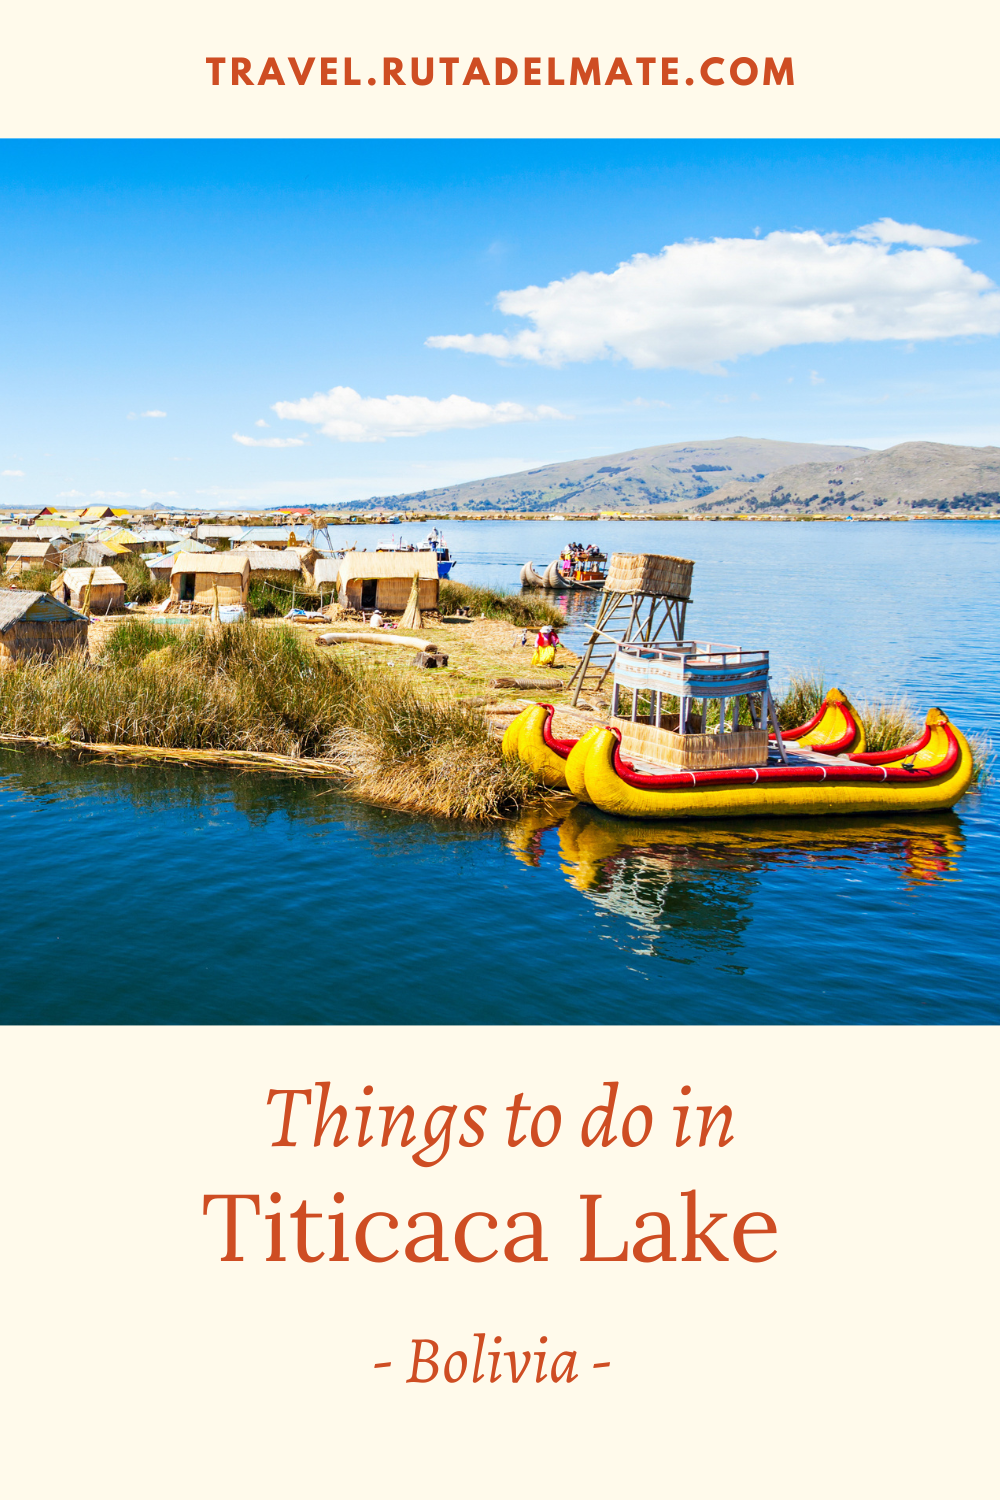 Guide to visit Lake Titicaca